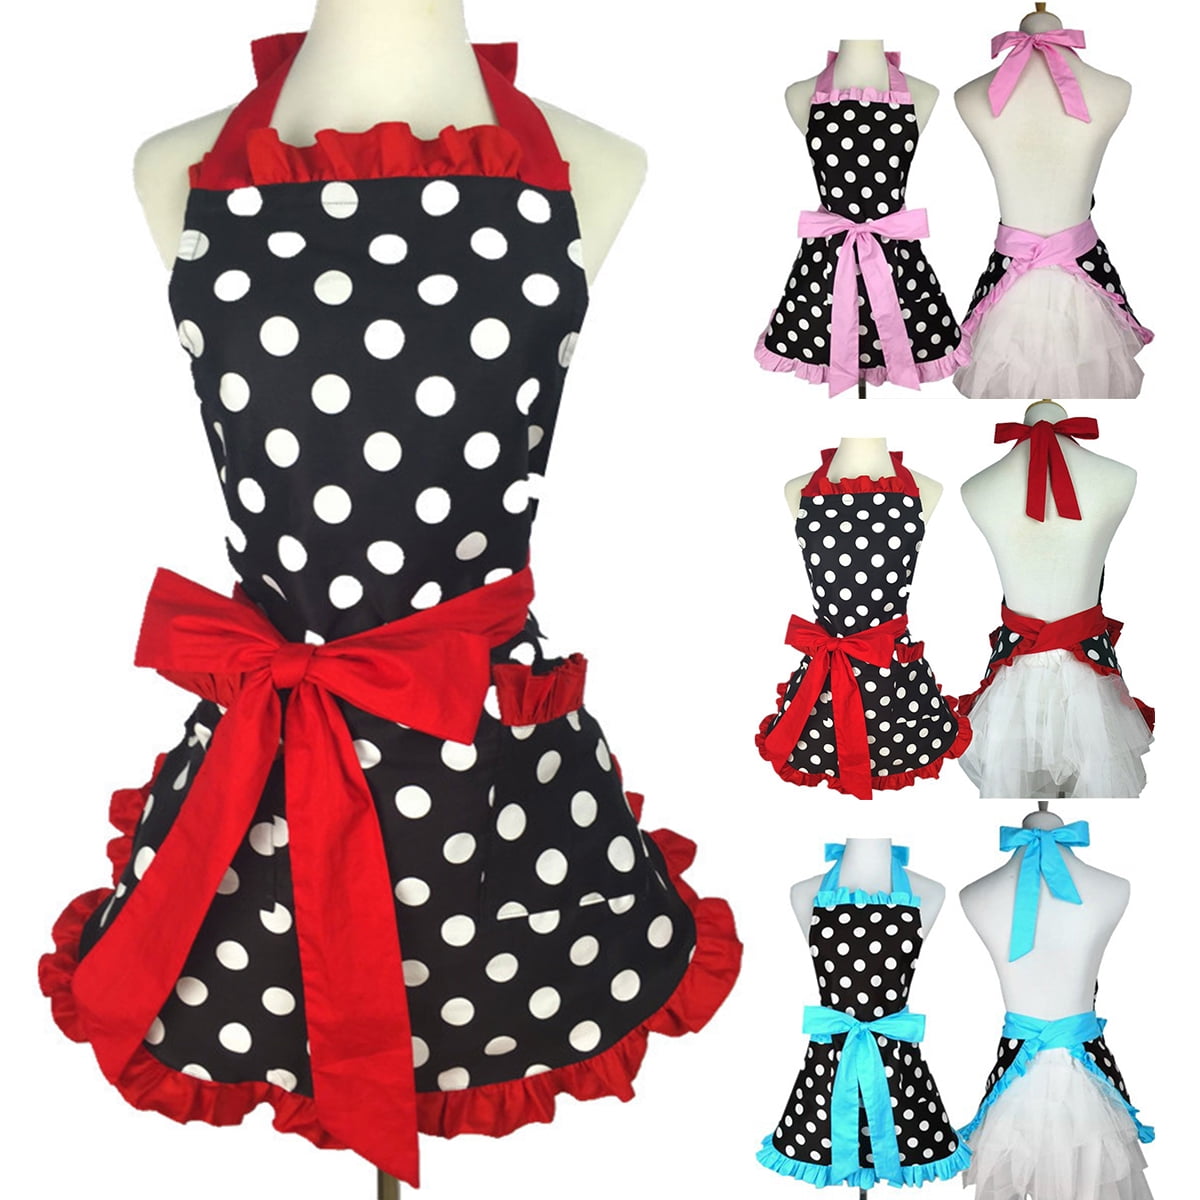 Lovely Cute Bowknot Mother and Daughter Apron Cotton Polka Dot Ruffled Kitchen 